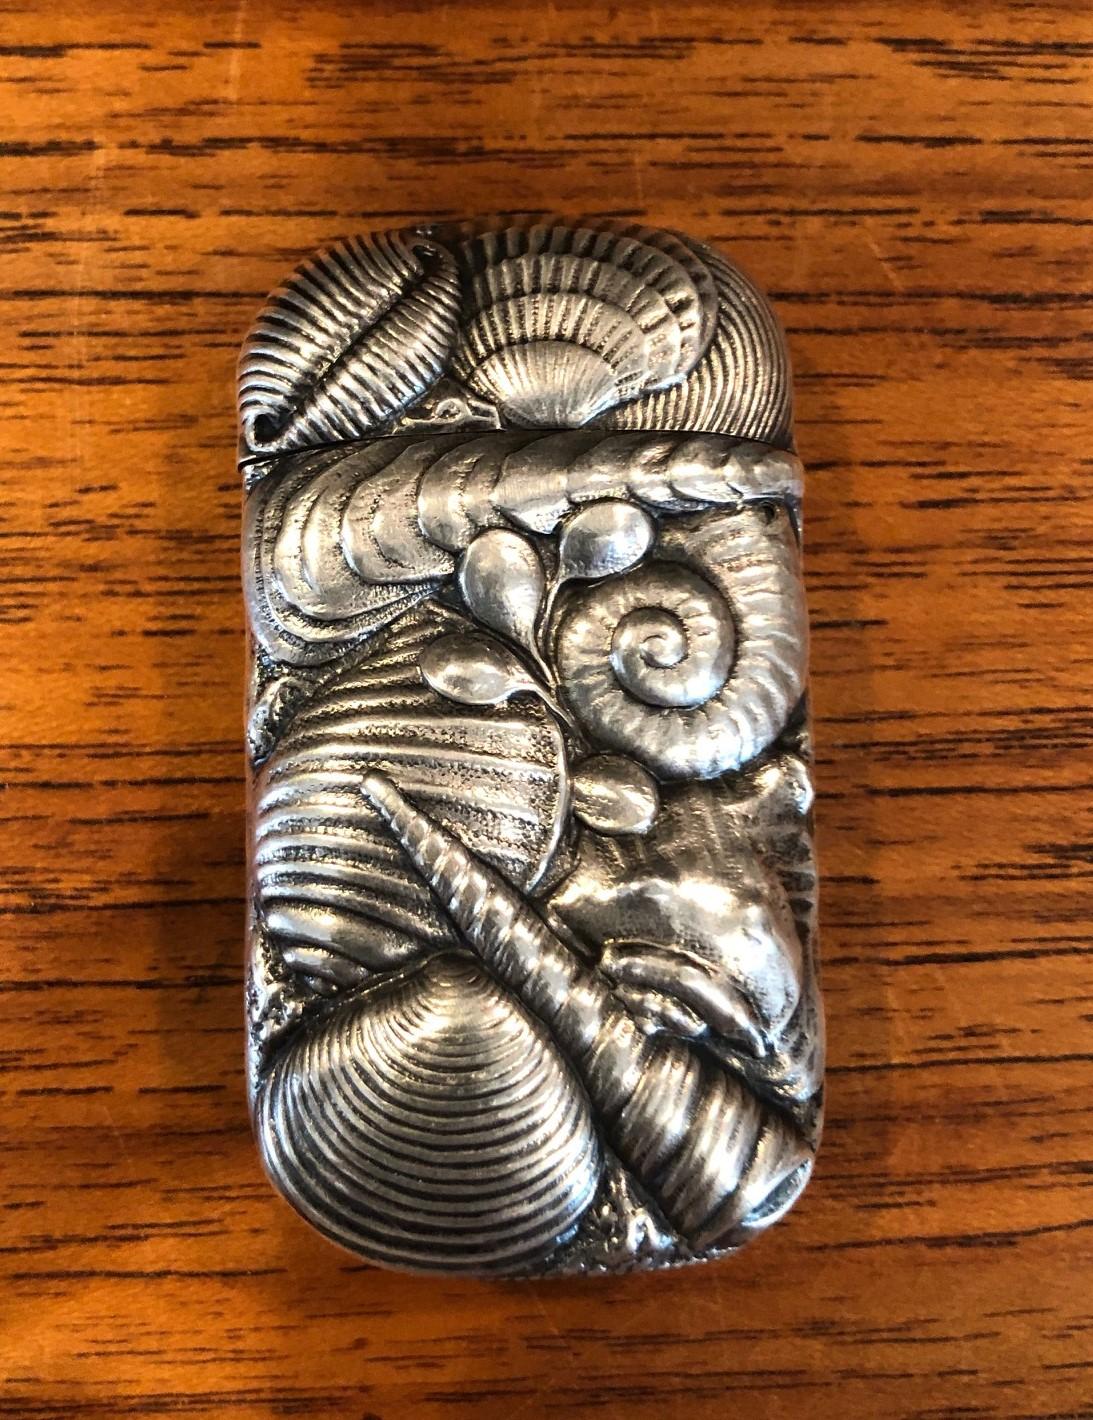 A very rare antique sterling silver repoussé match safe / vesta with shell decoration by George Shiebler & Co., New York, New York, circa 1890s. The piece is in superb condition with a hinged lid and a match strike bottom. Marked with Shiebler's